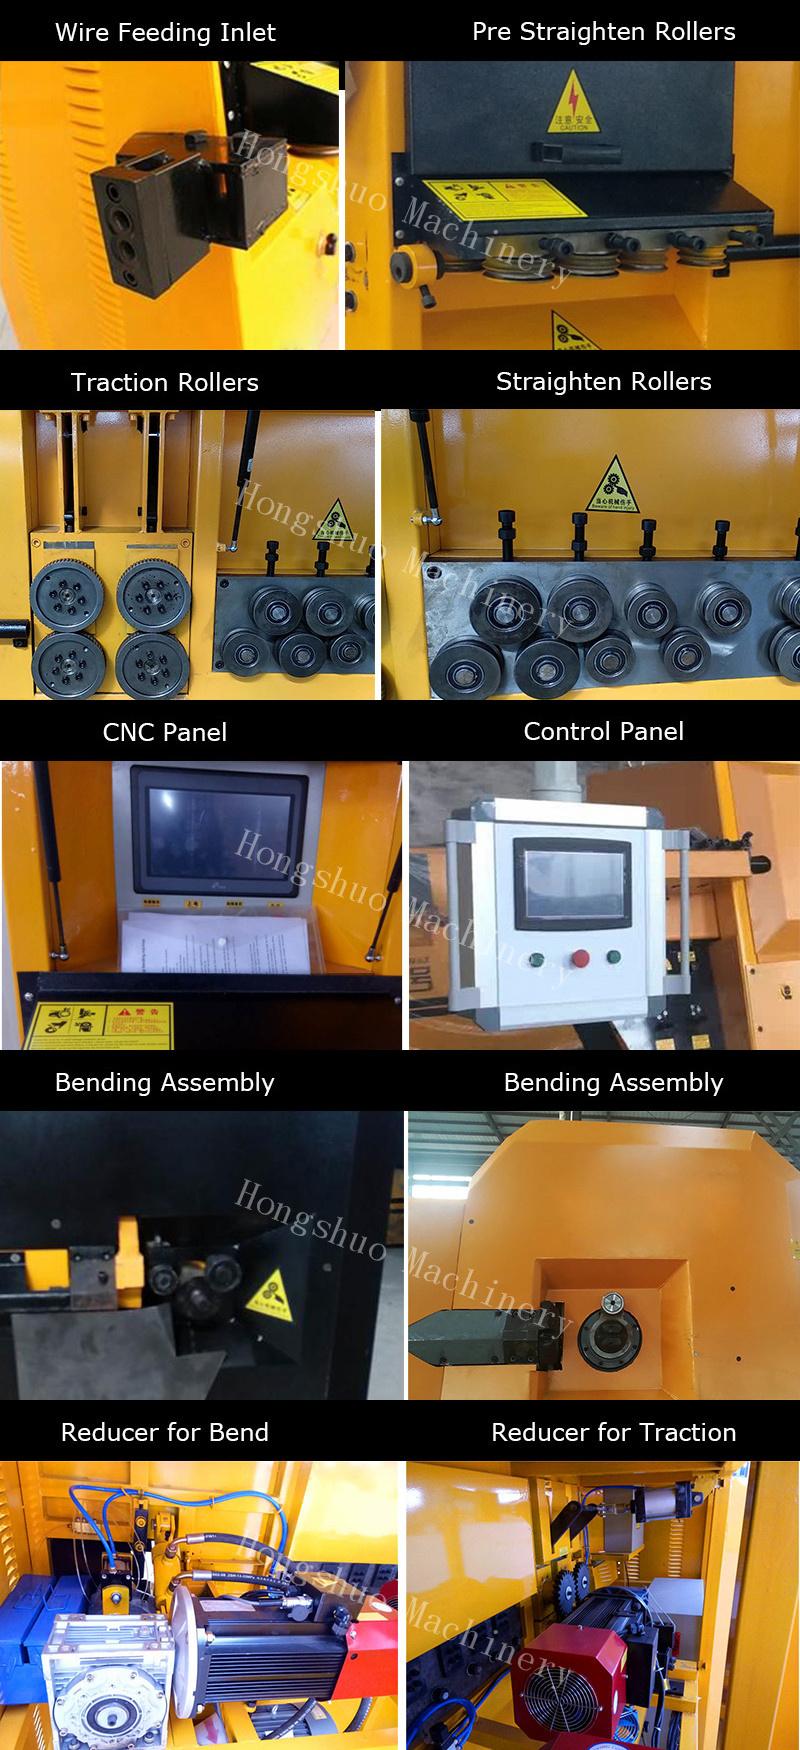 Automatic Wire Cutting Stripping Bending Tools/Automatic Bar Bender, Economical /Practical/Angle Bar Bending Machine